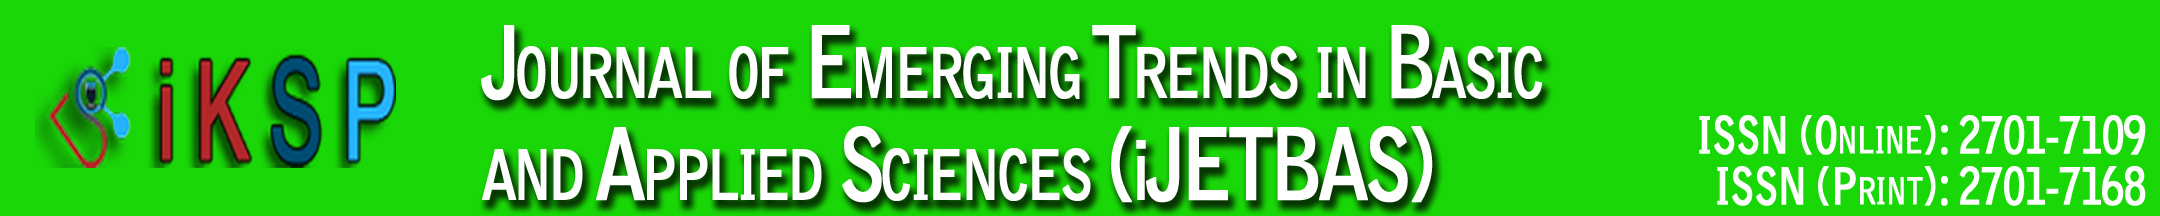 iKSP Journal of Emerging Trends in Basic and Applied Sciences (IJETBAS)